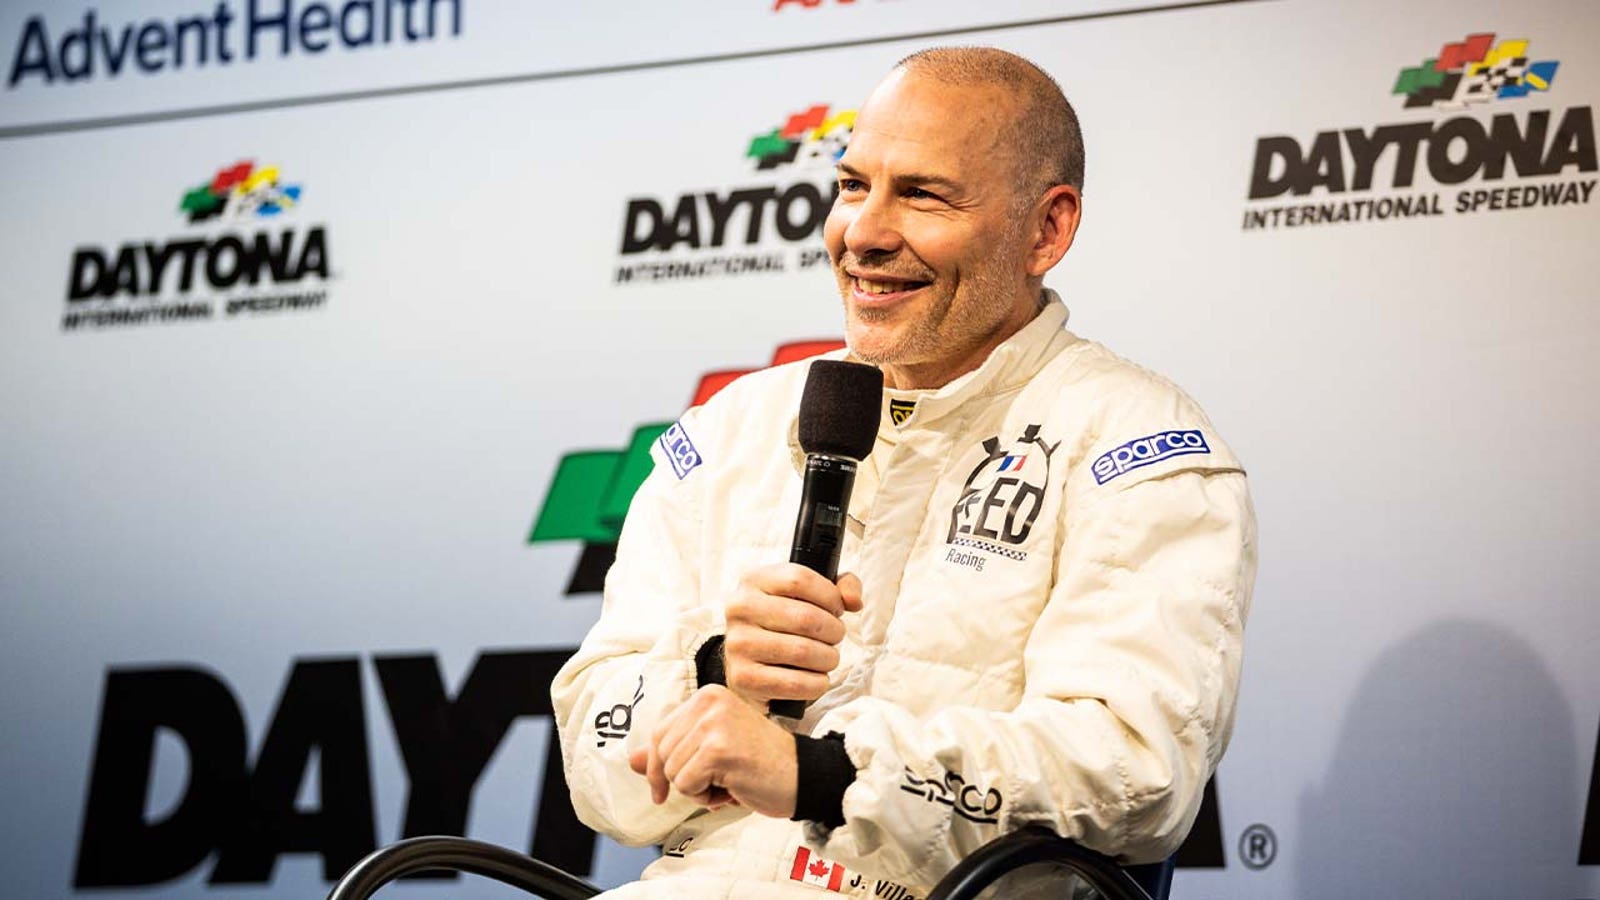 Where does making the Daytona 500 rank in the career of Jacques Villeneuve?